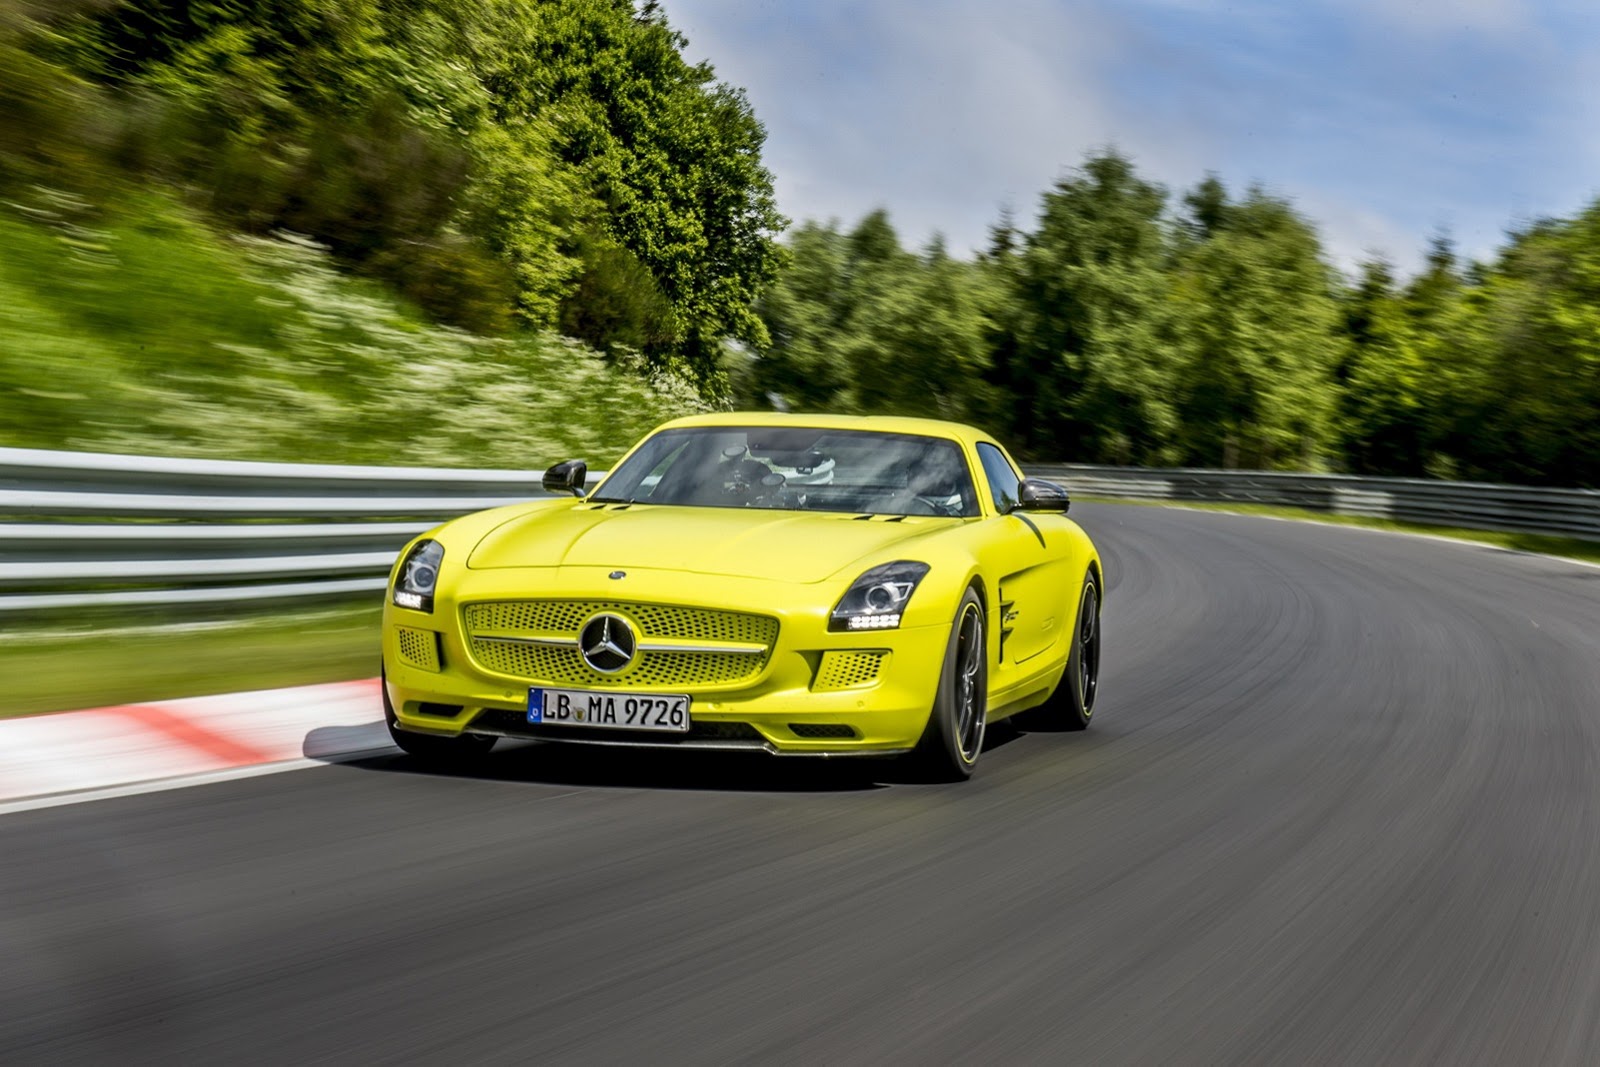 Future Mercedes-AMG models could be all-electric